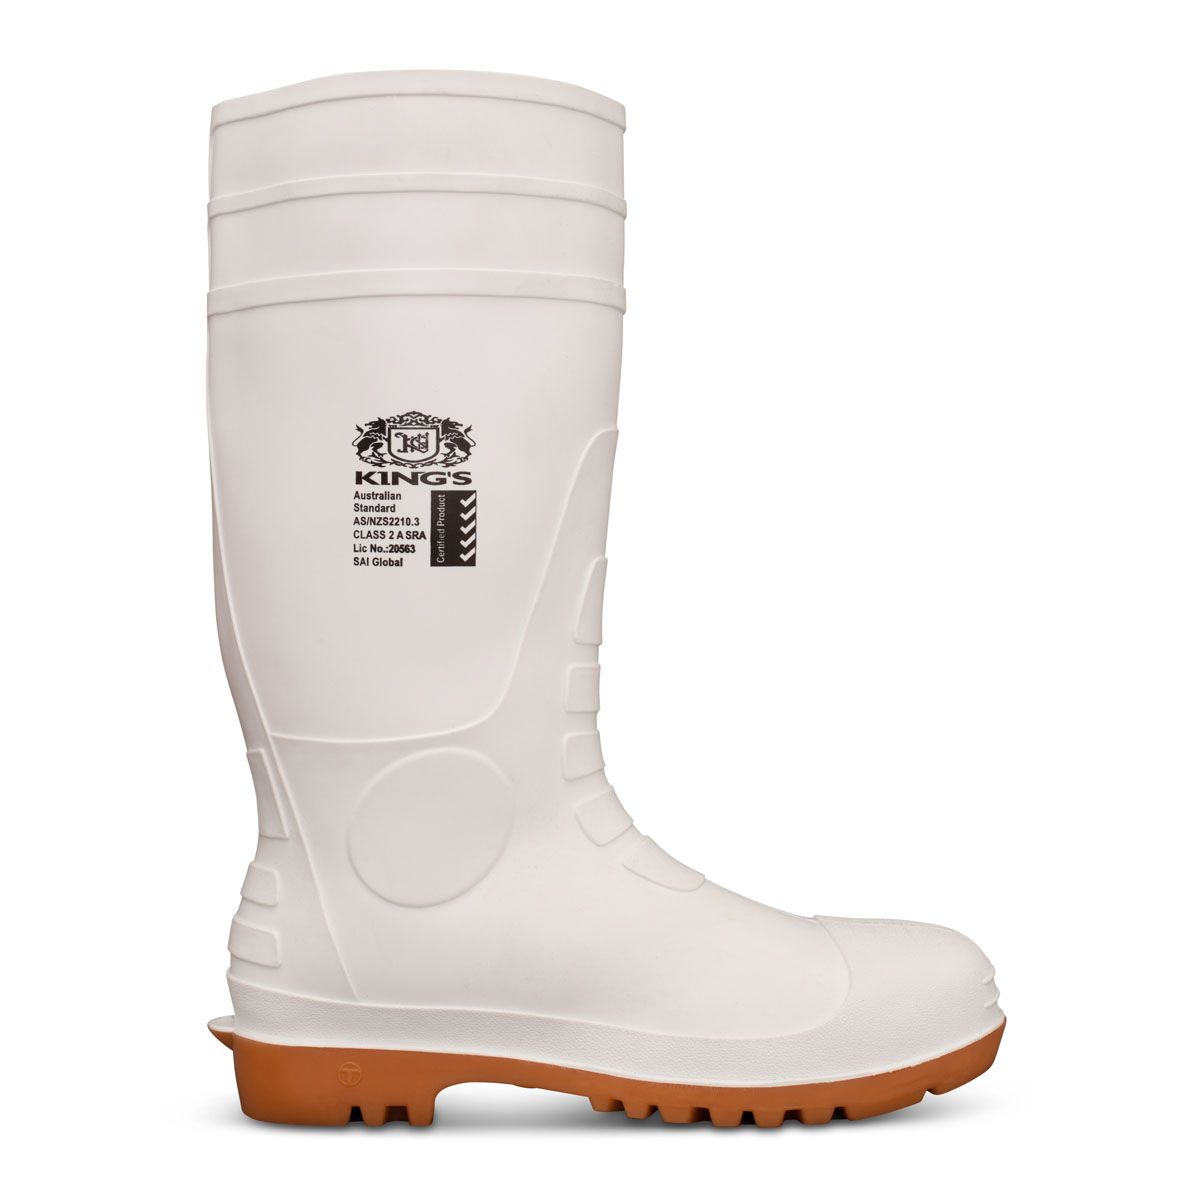 GUMBOOT KING'S WHITE SIZE 10 -HEAVY DUTY PVC/NITRILE SOLE